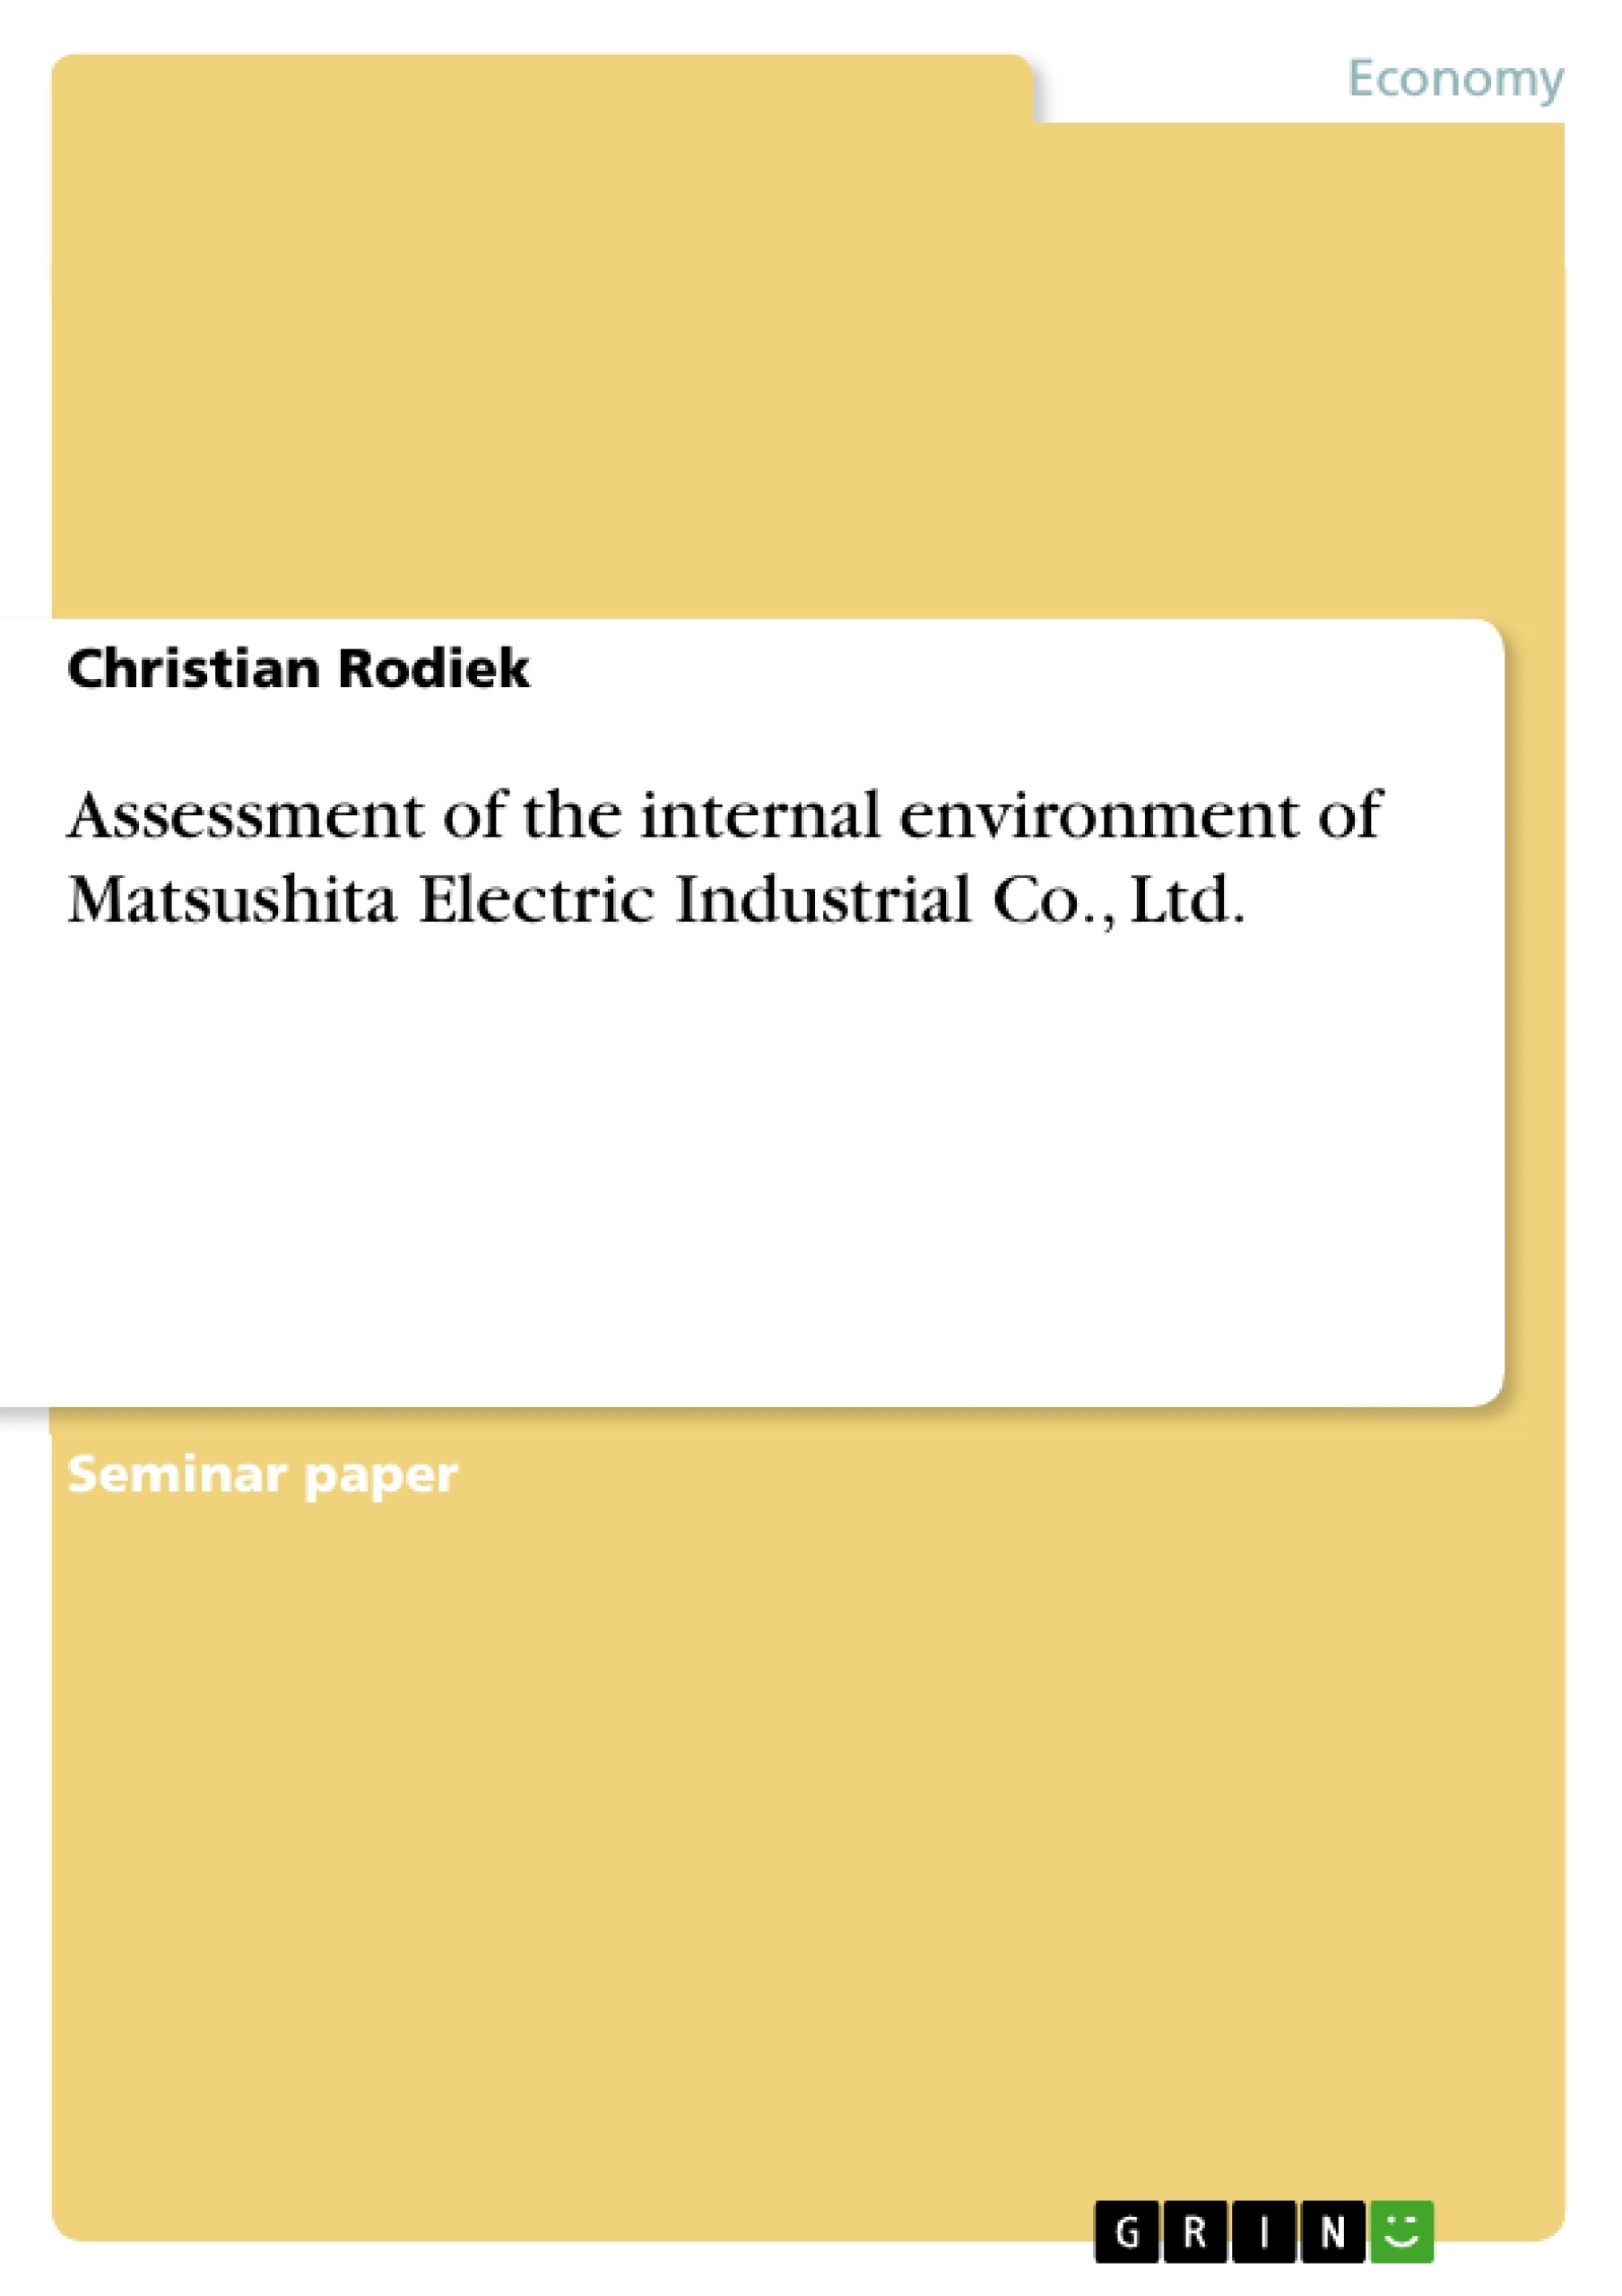 Title: Assessment of the internal environment of Matsushita Electric Industrial Co., Ltd.